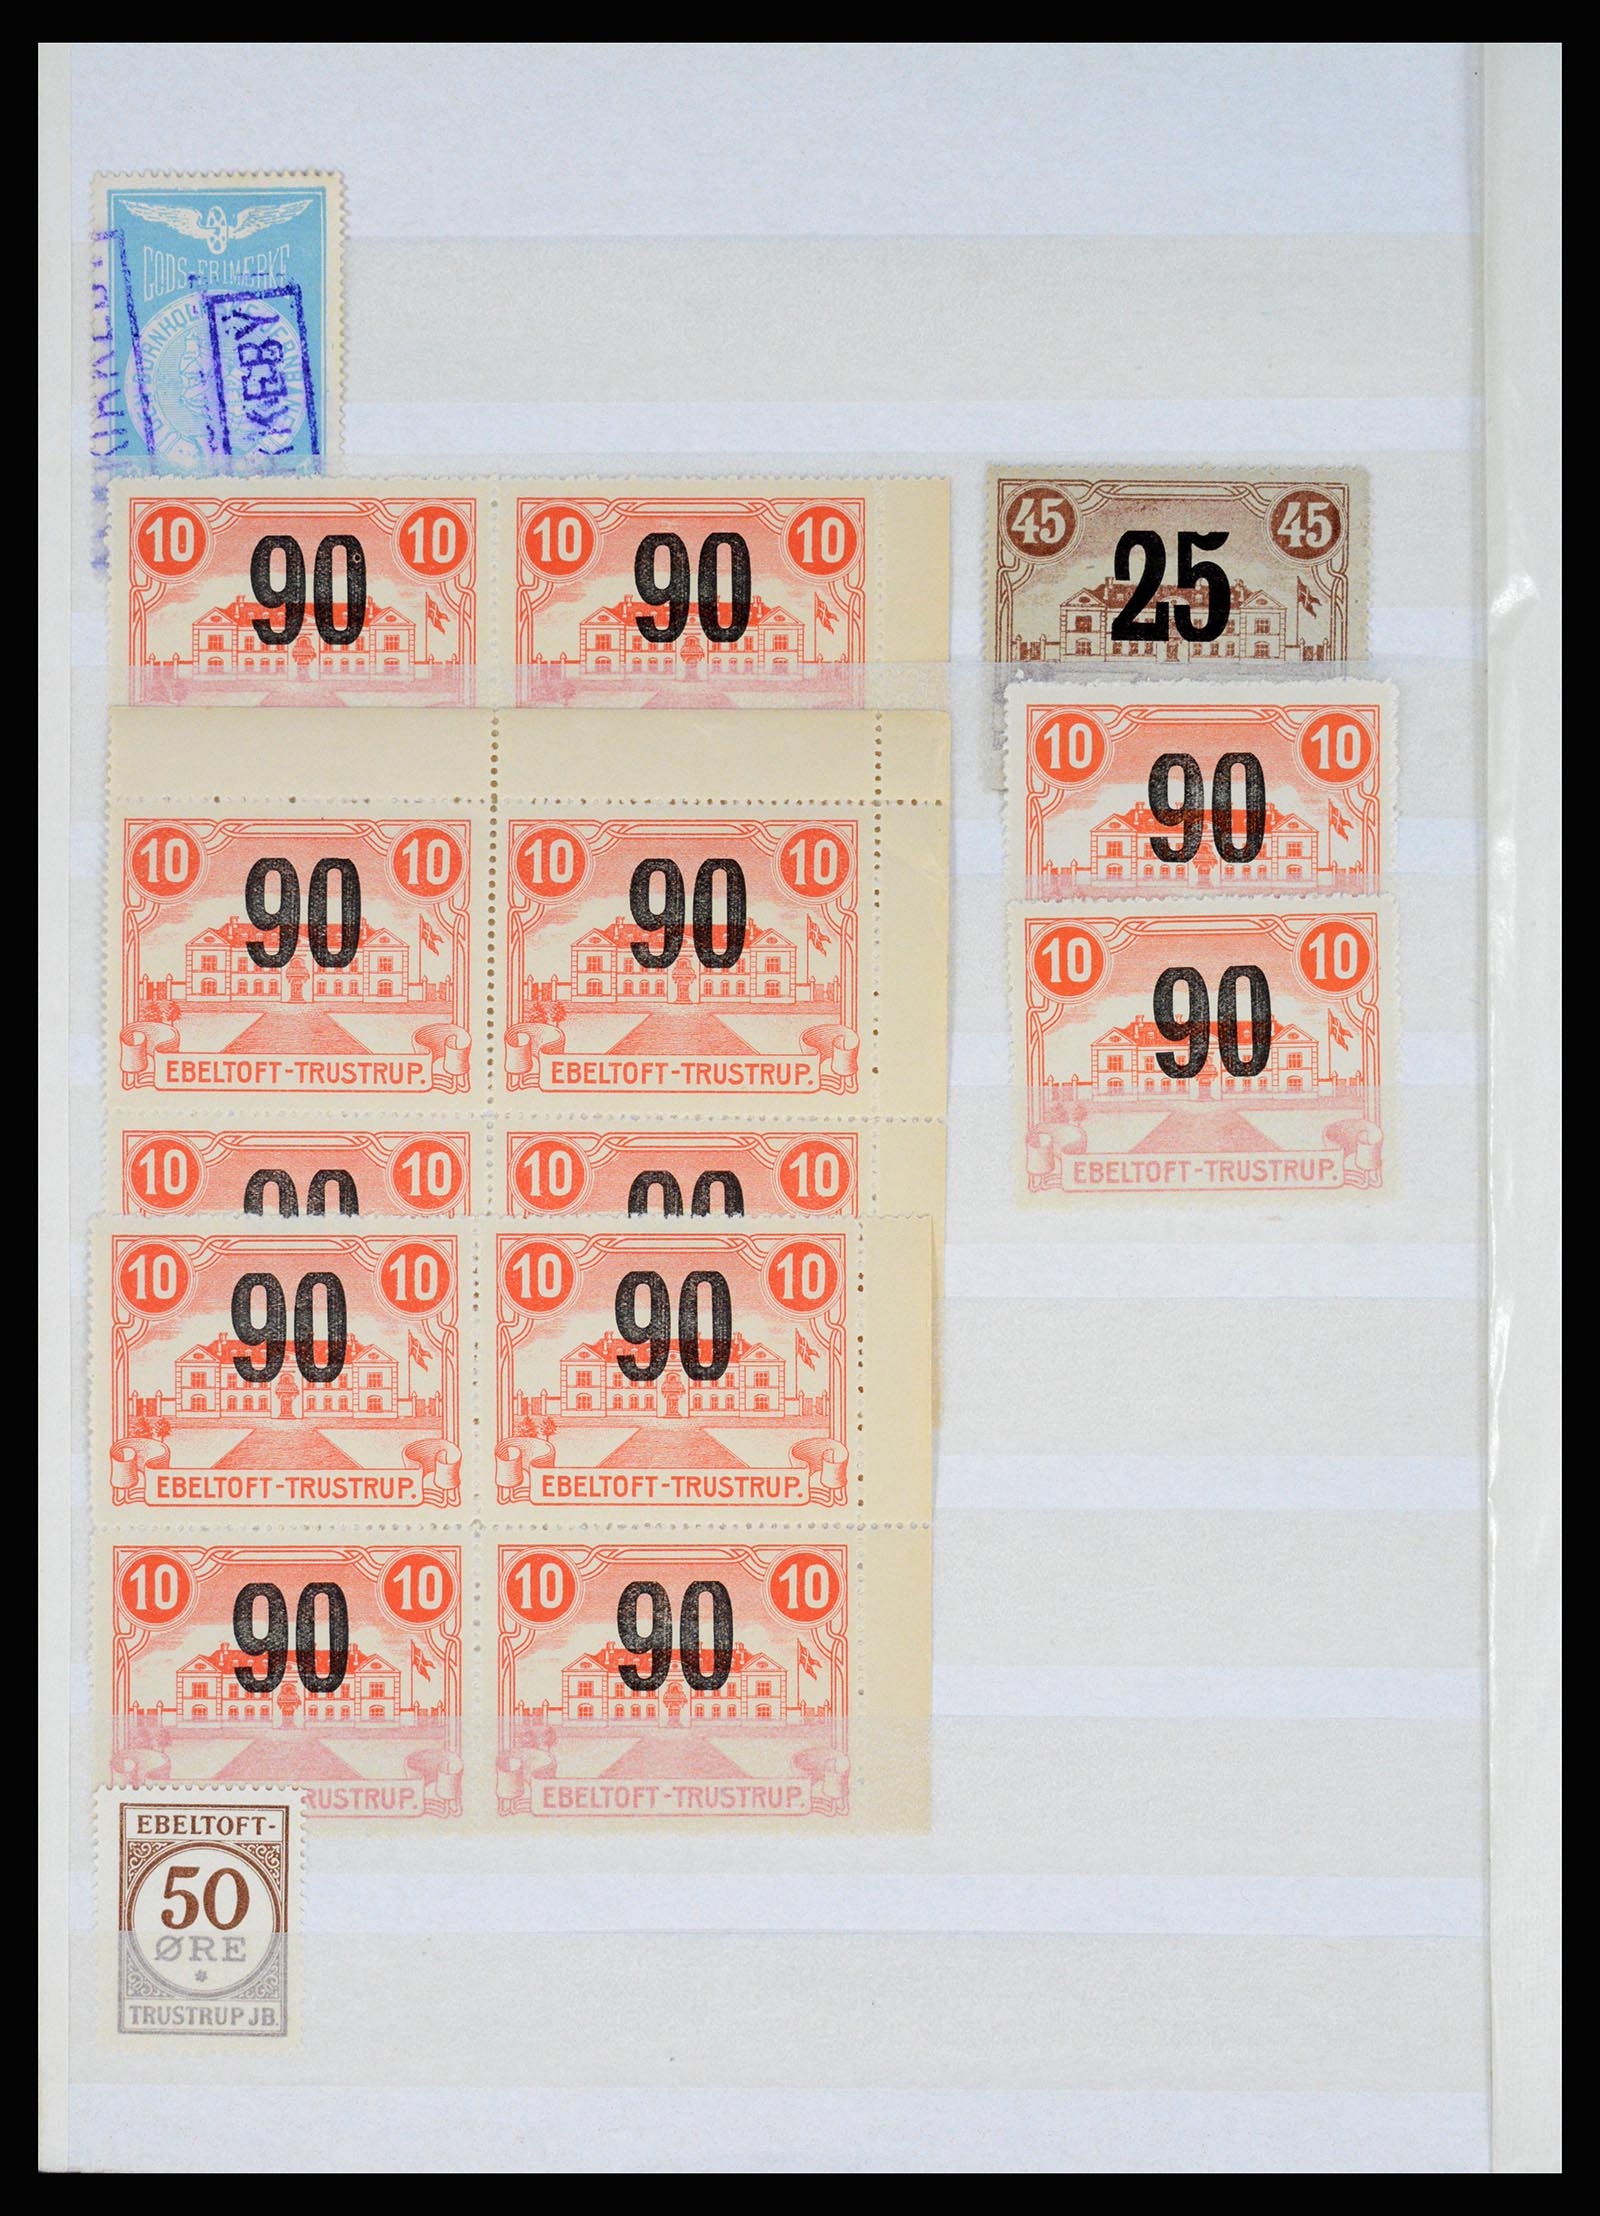 36982 016 - Stamp collection 36982 Denmark railroad stamps.